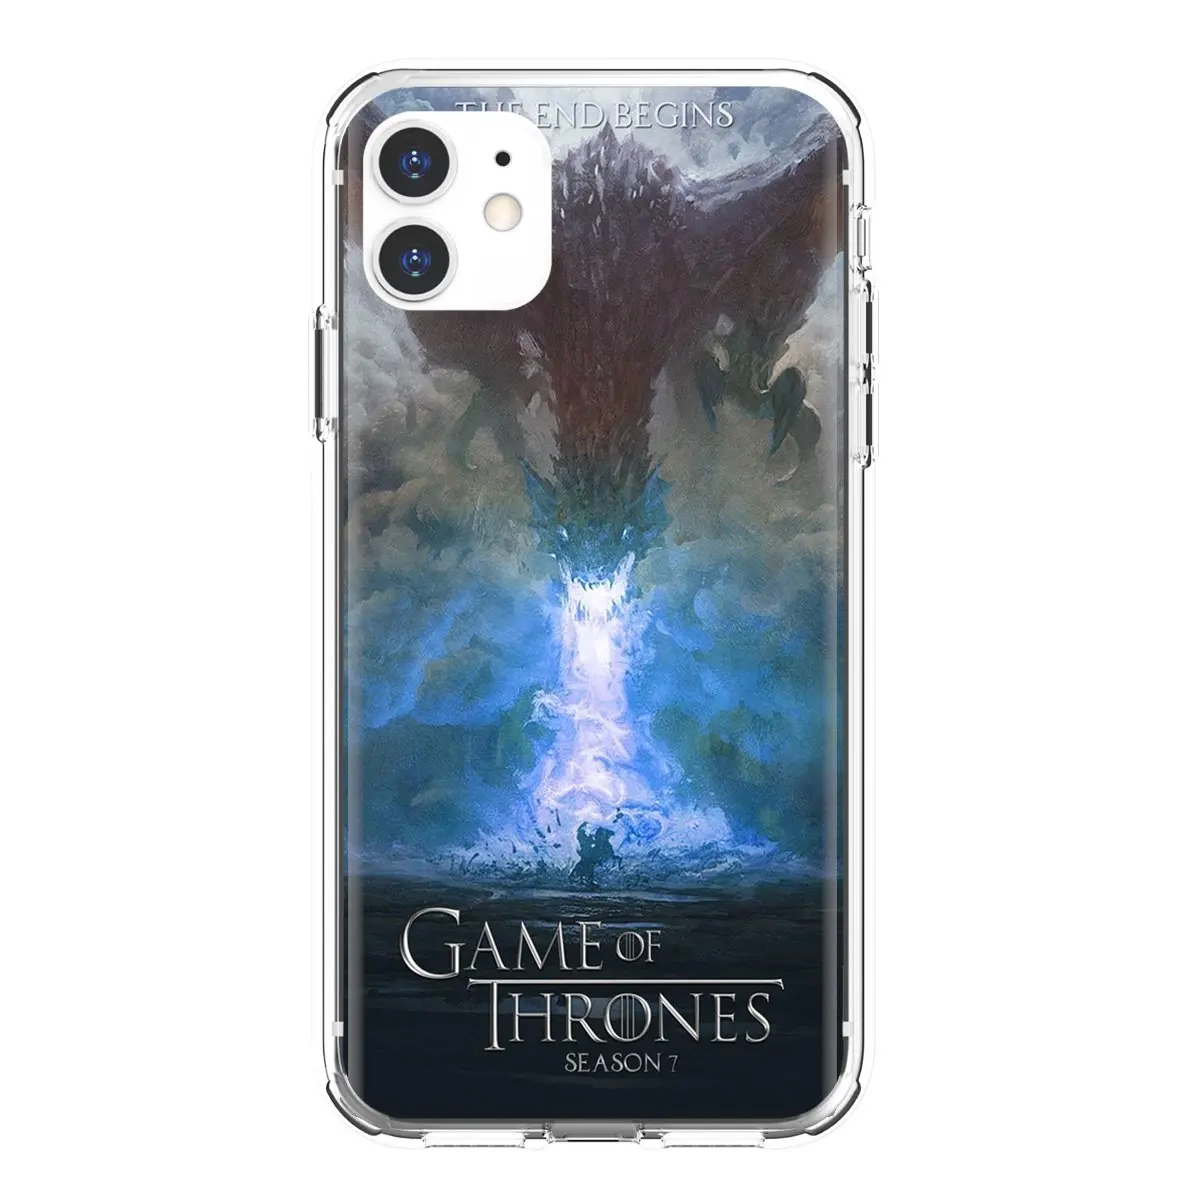 Game-of-Thrones-Season-7 Soft Transparent Case Cover For iPod Touch 5 6 Xiaomi Redmi S2 6 Pro 5A Pocophone F1 LG G6 Q6 Q7 G5 images - 6